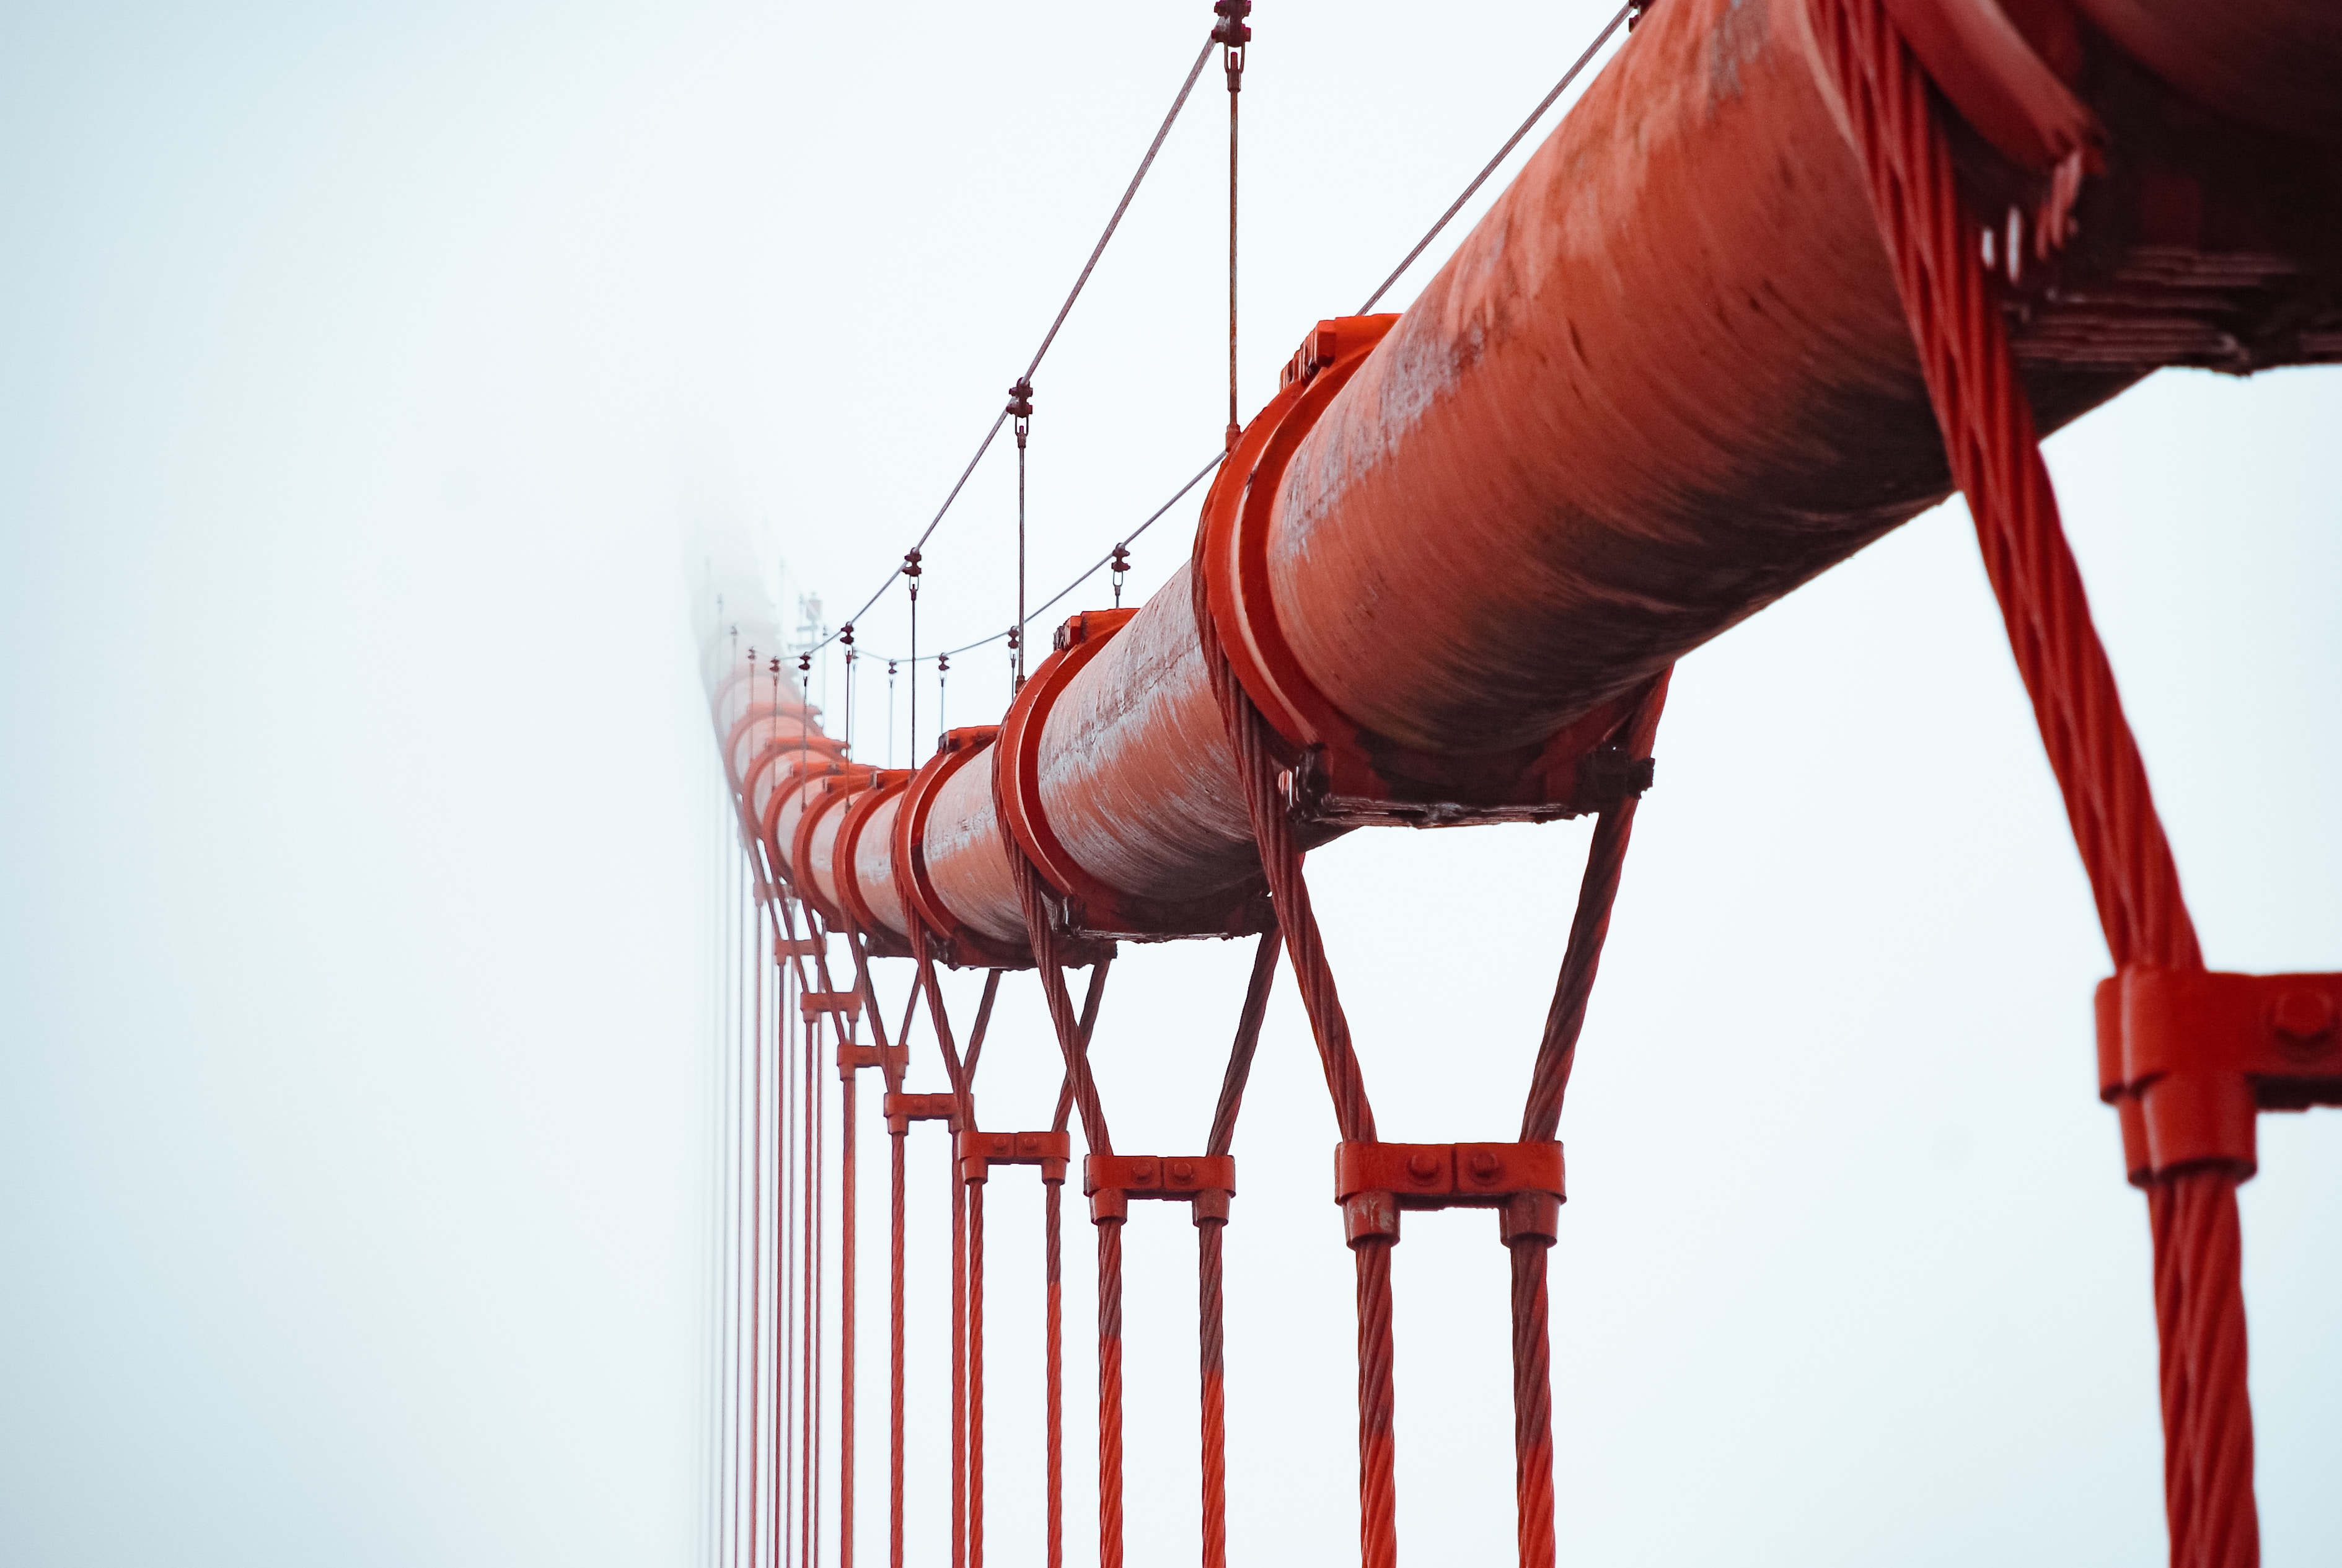 illustration image showing red pipe with red ropes in a white background with fog ahead